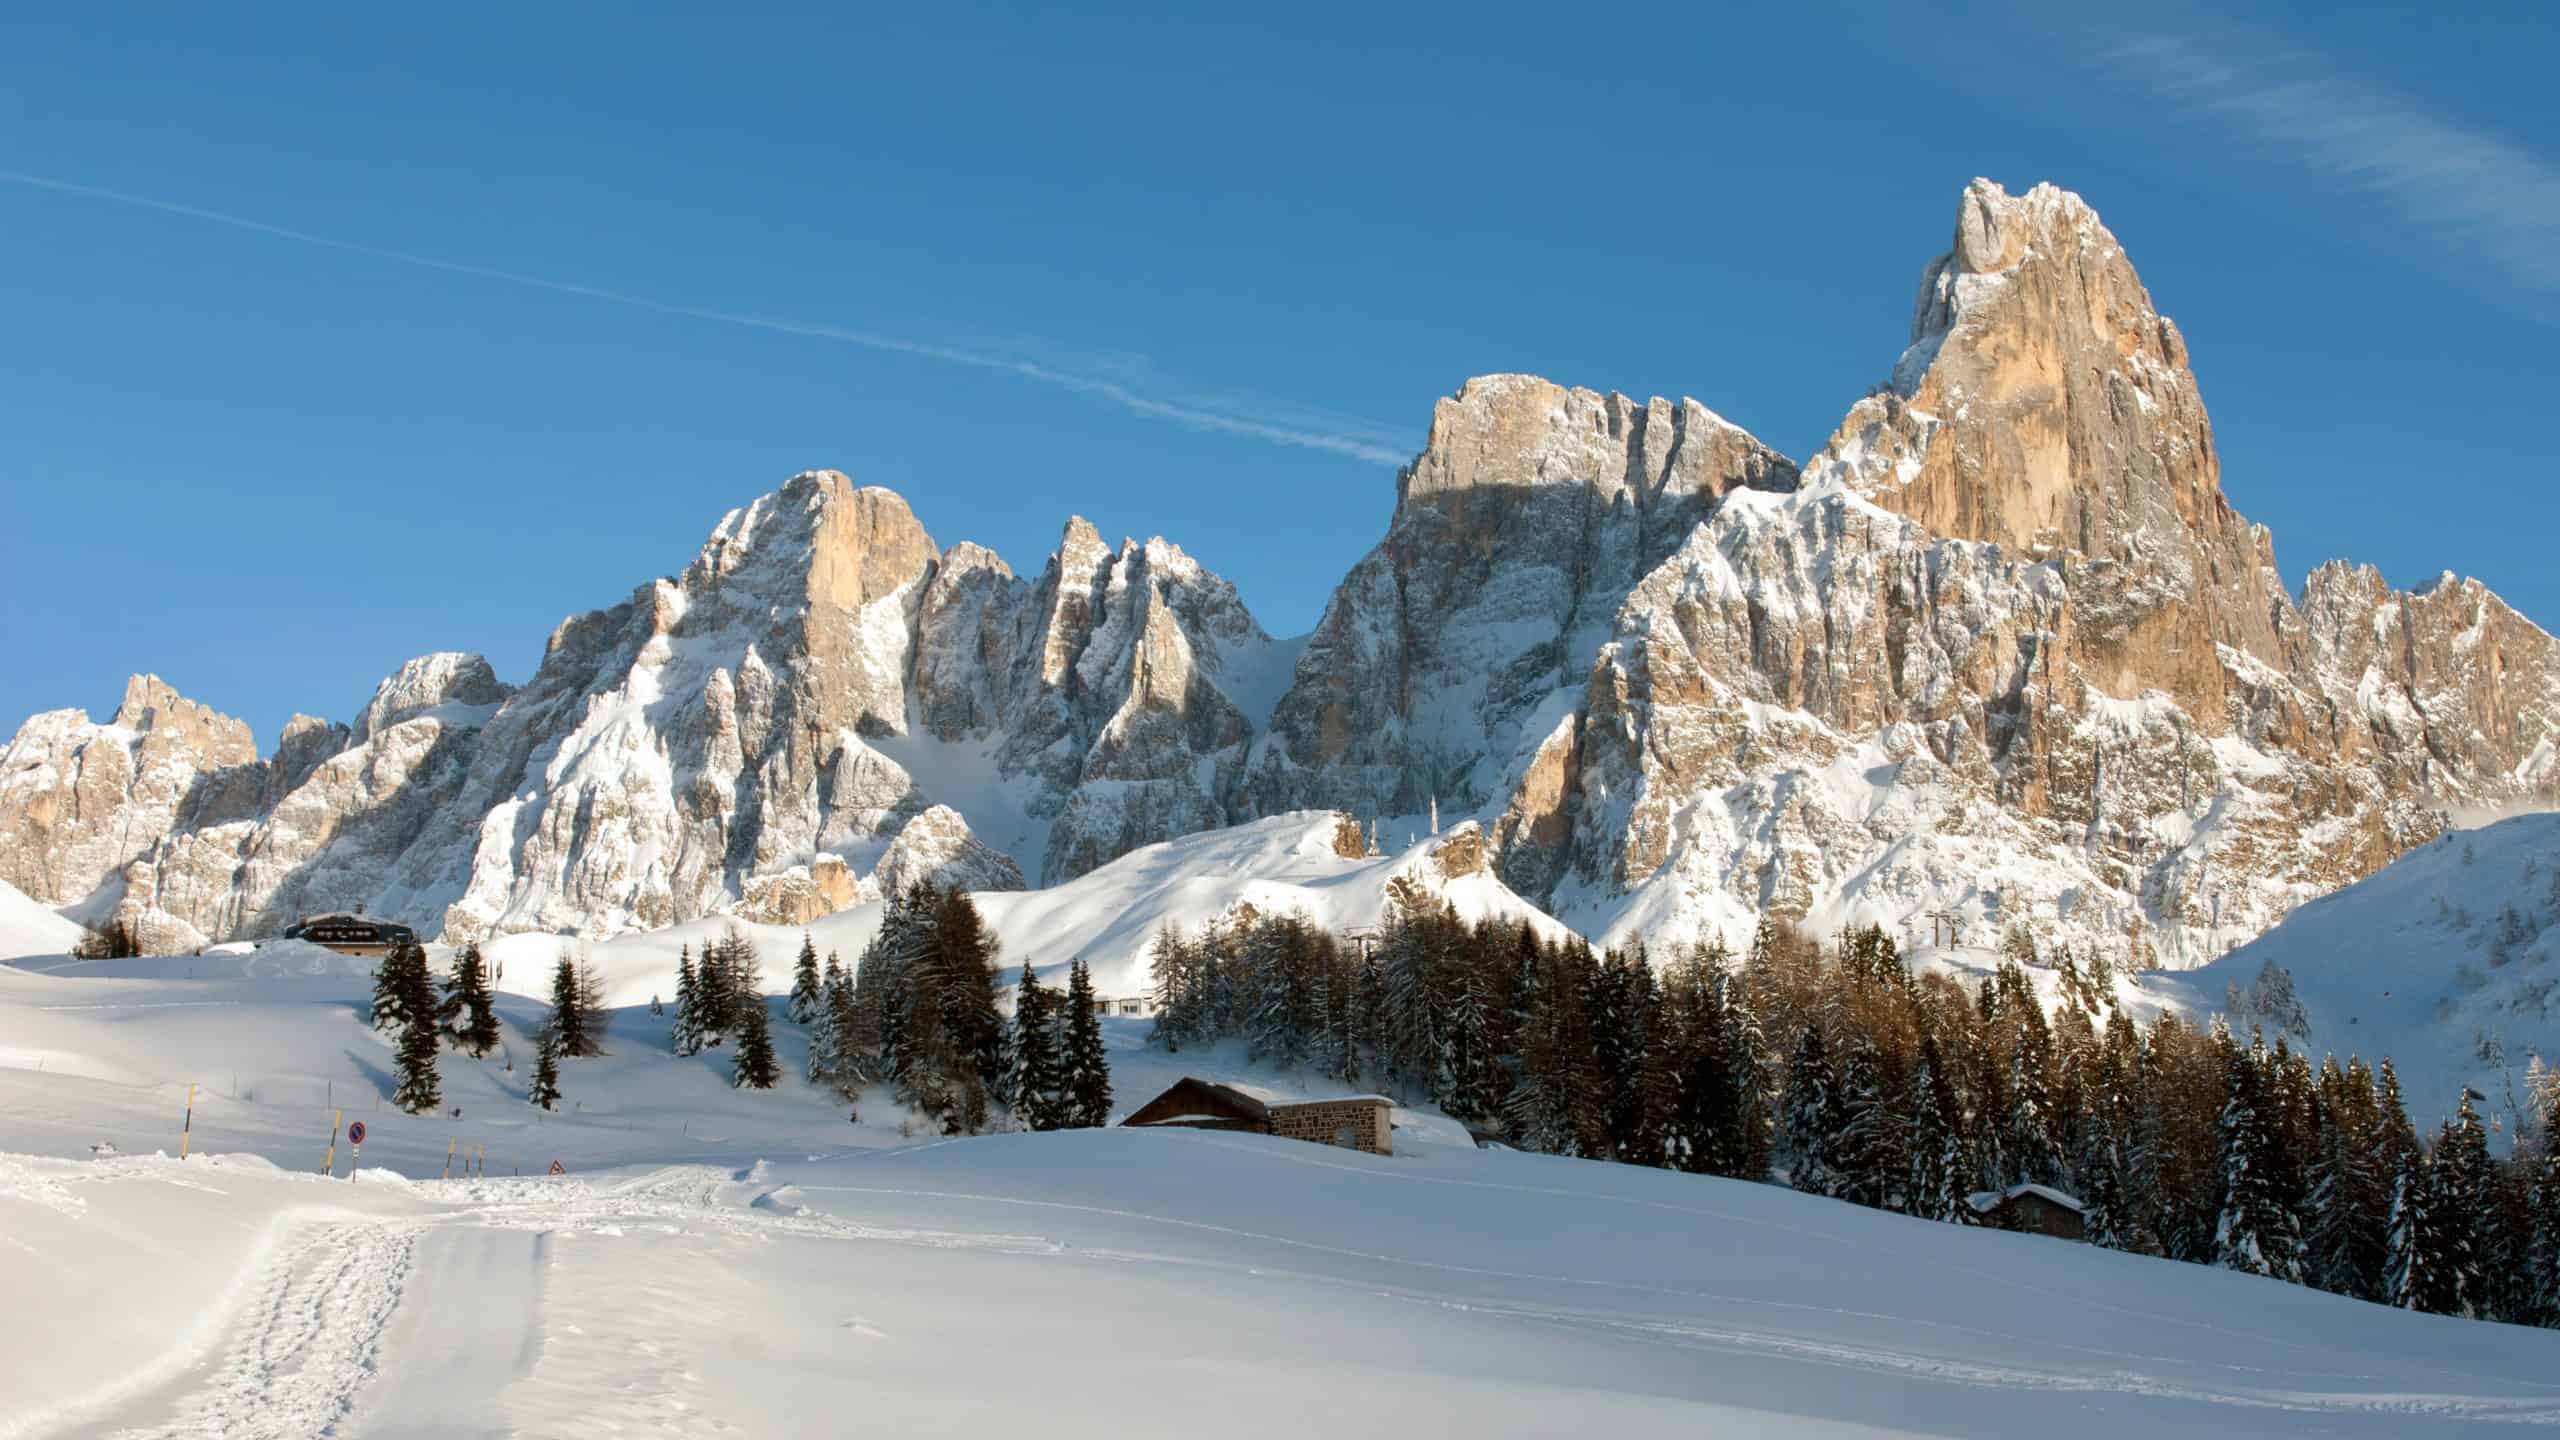 The Dolomites, Northern Italy